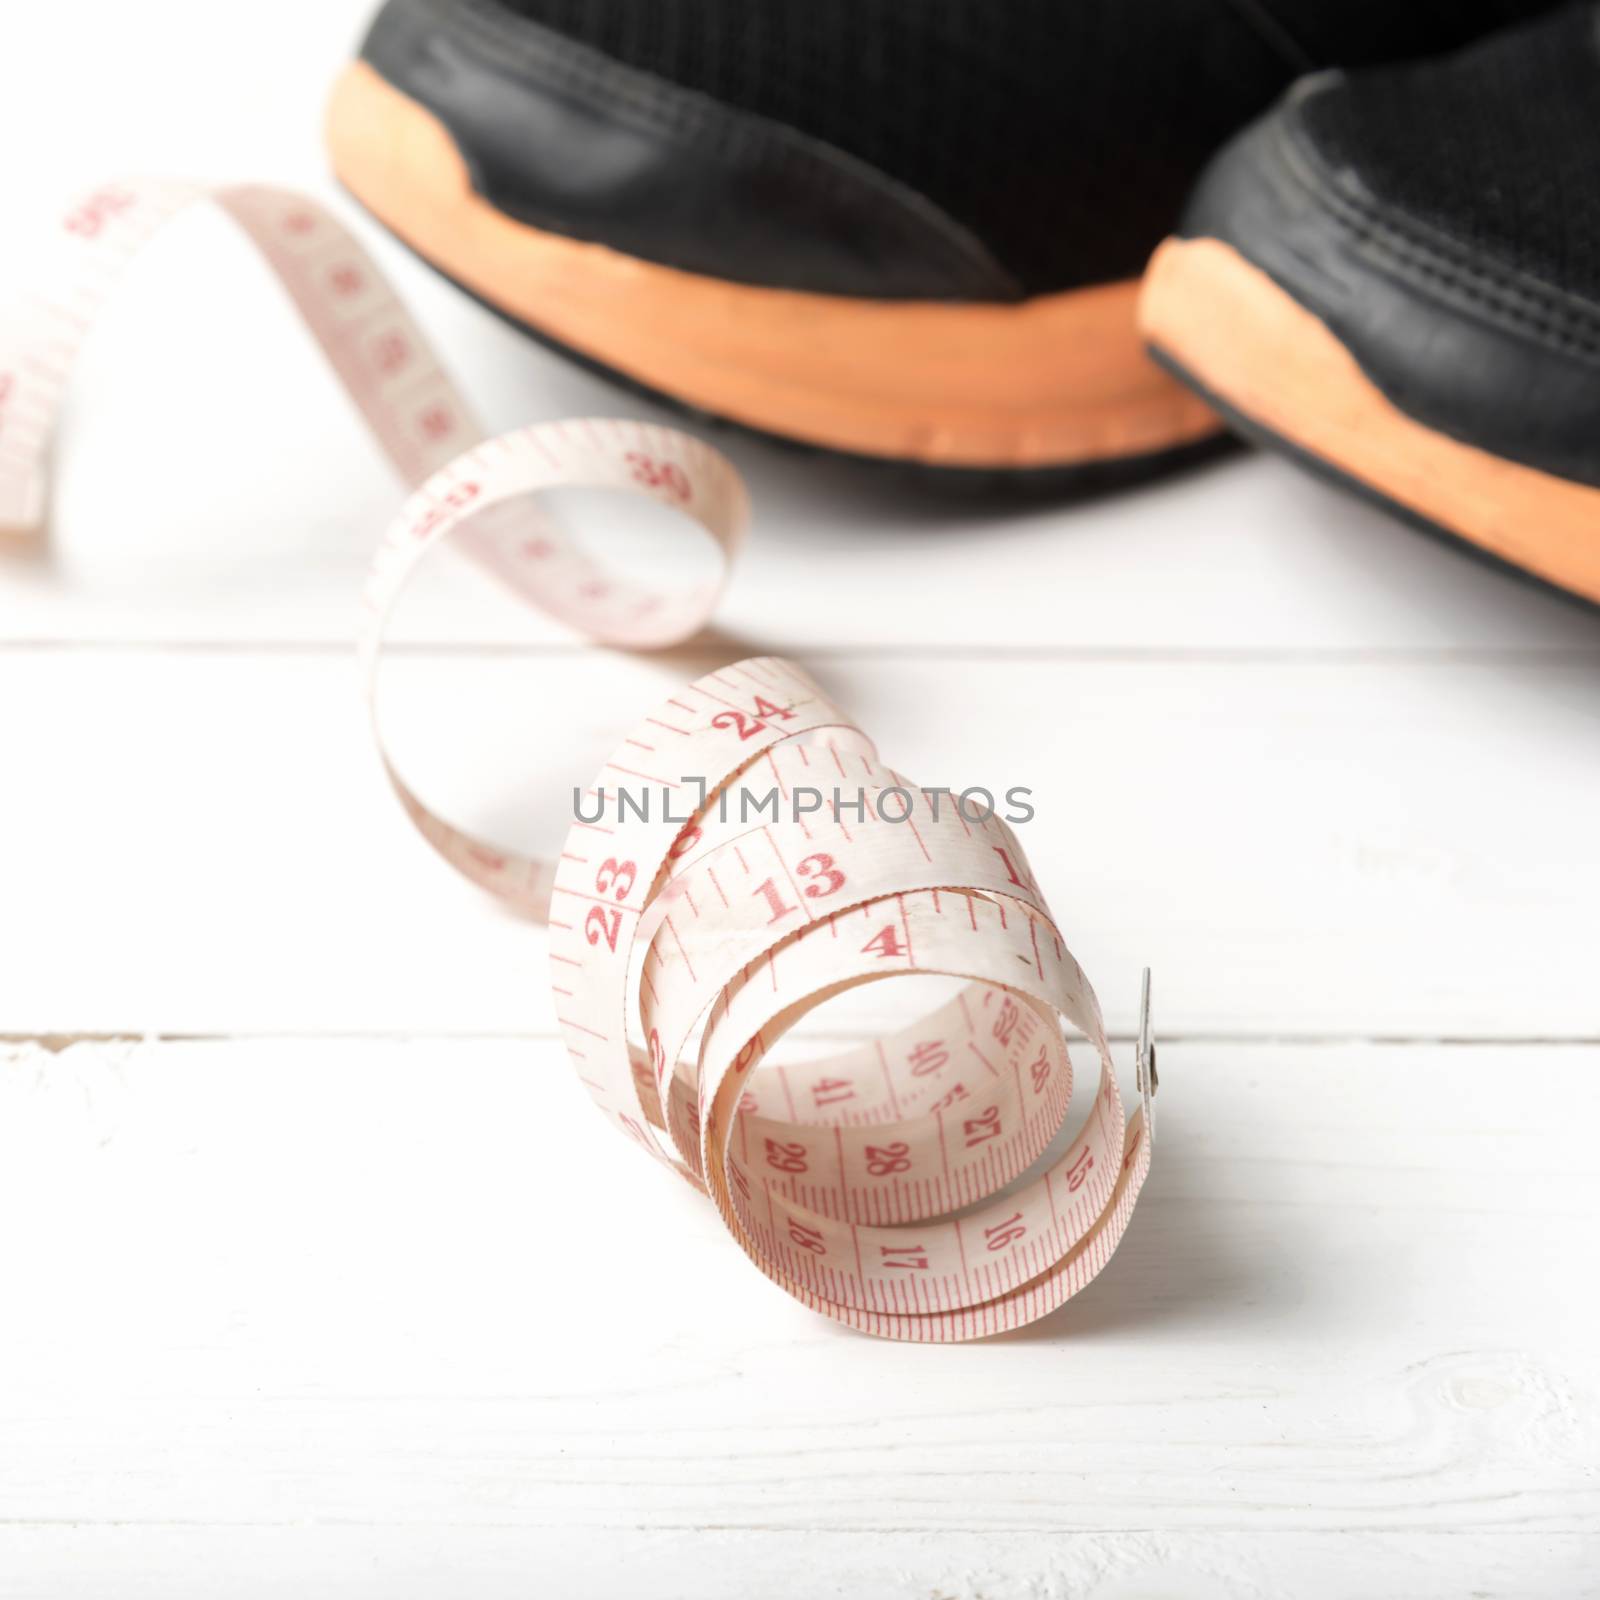 running shoes and measuring tape by ammza12